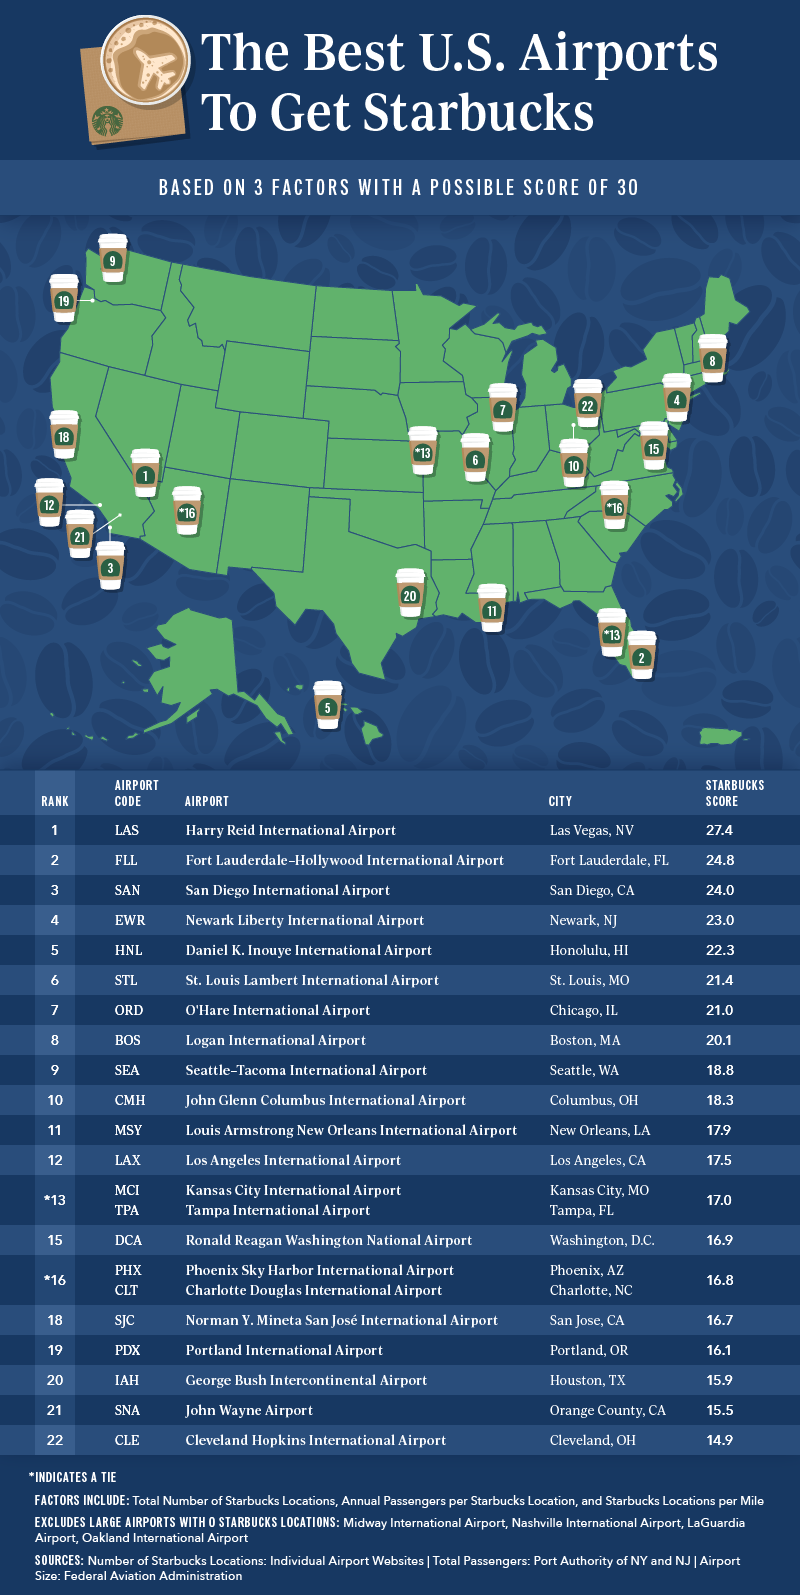 A chart depicting the 22 best major U.S. airports for buying Starbucks